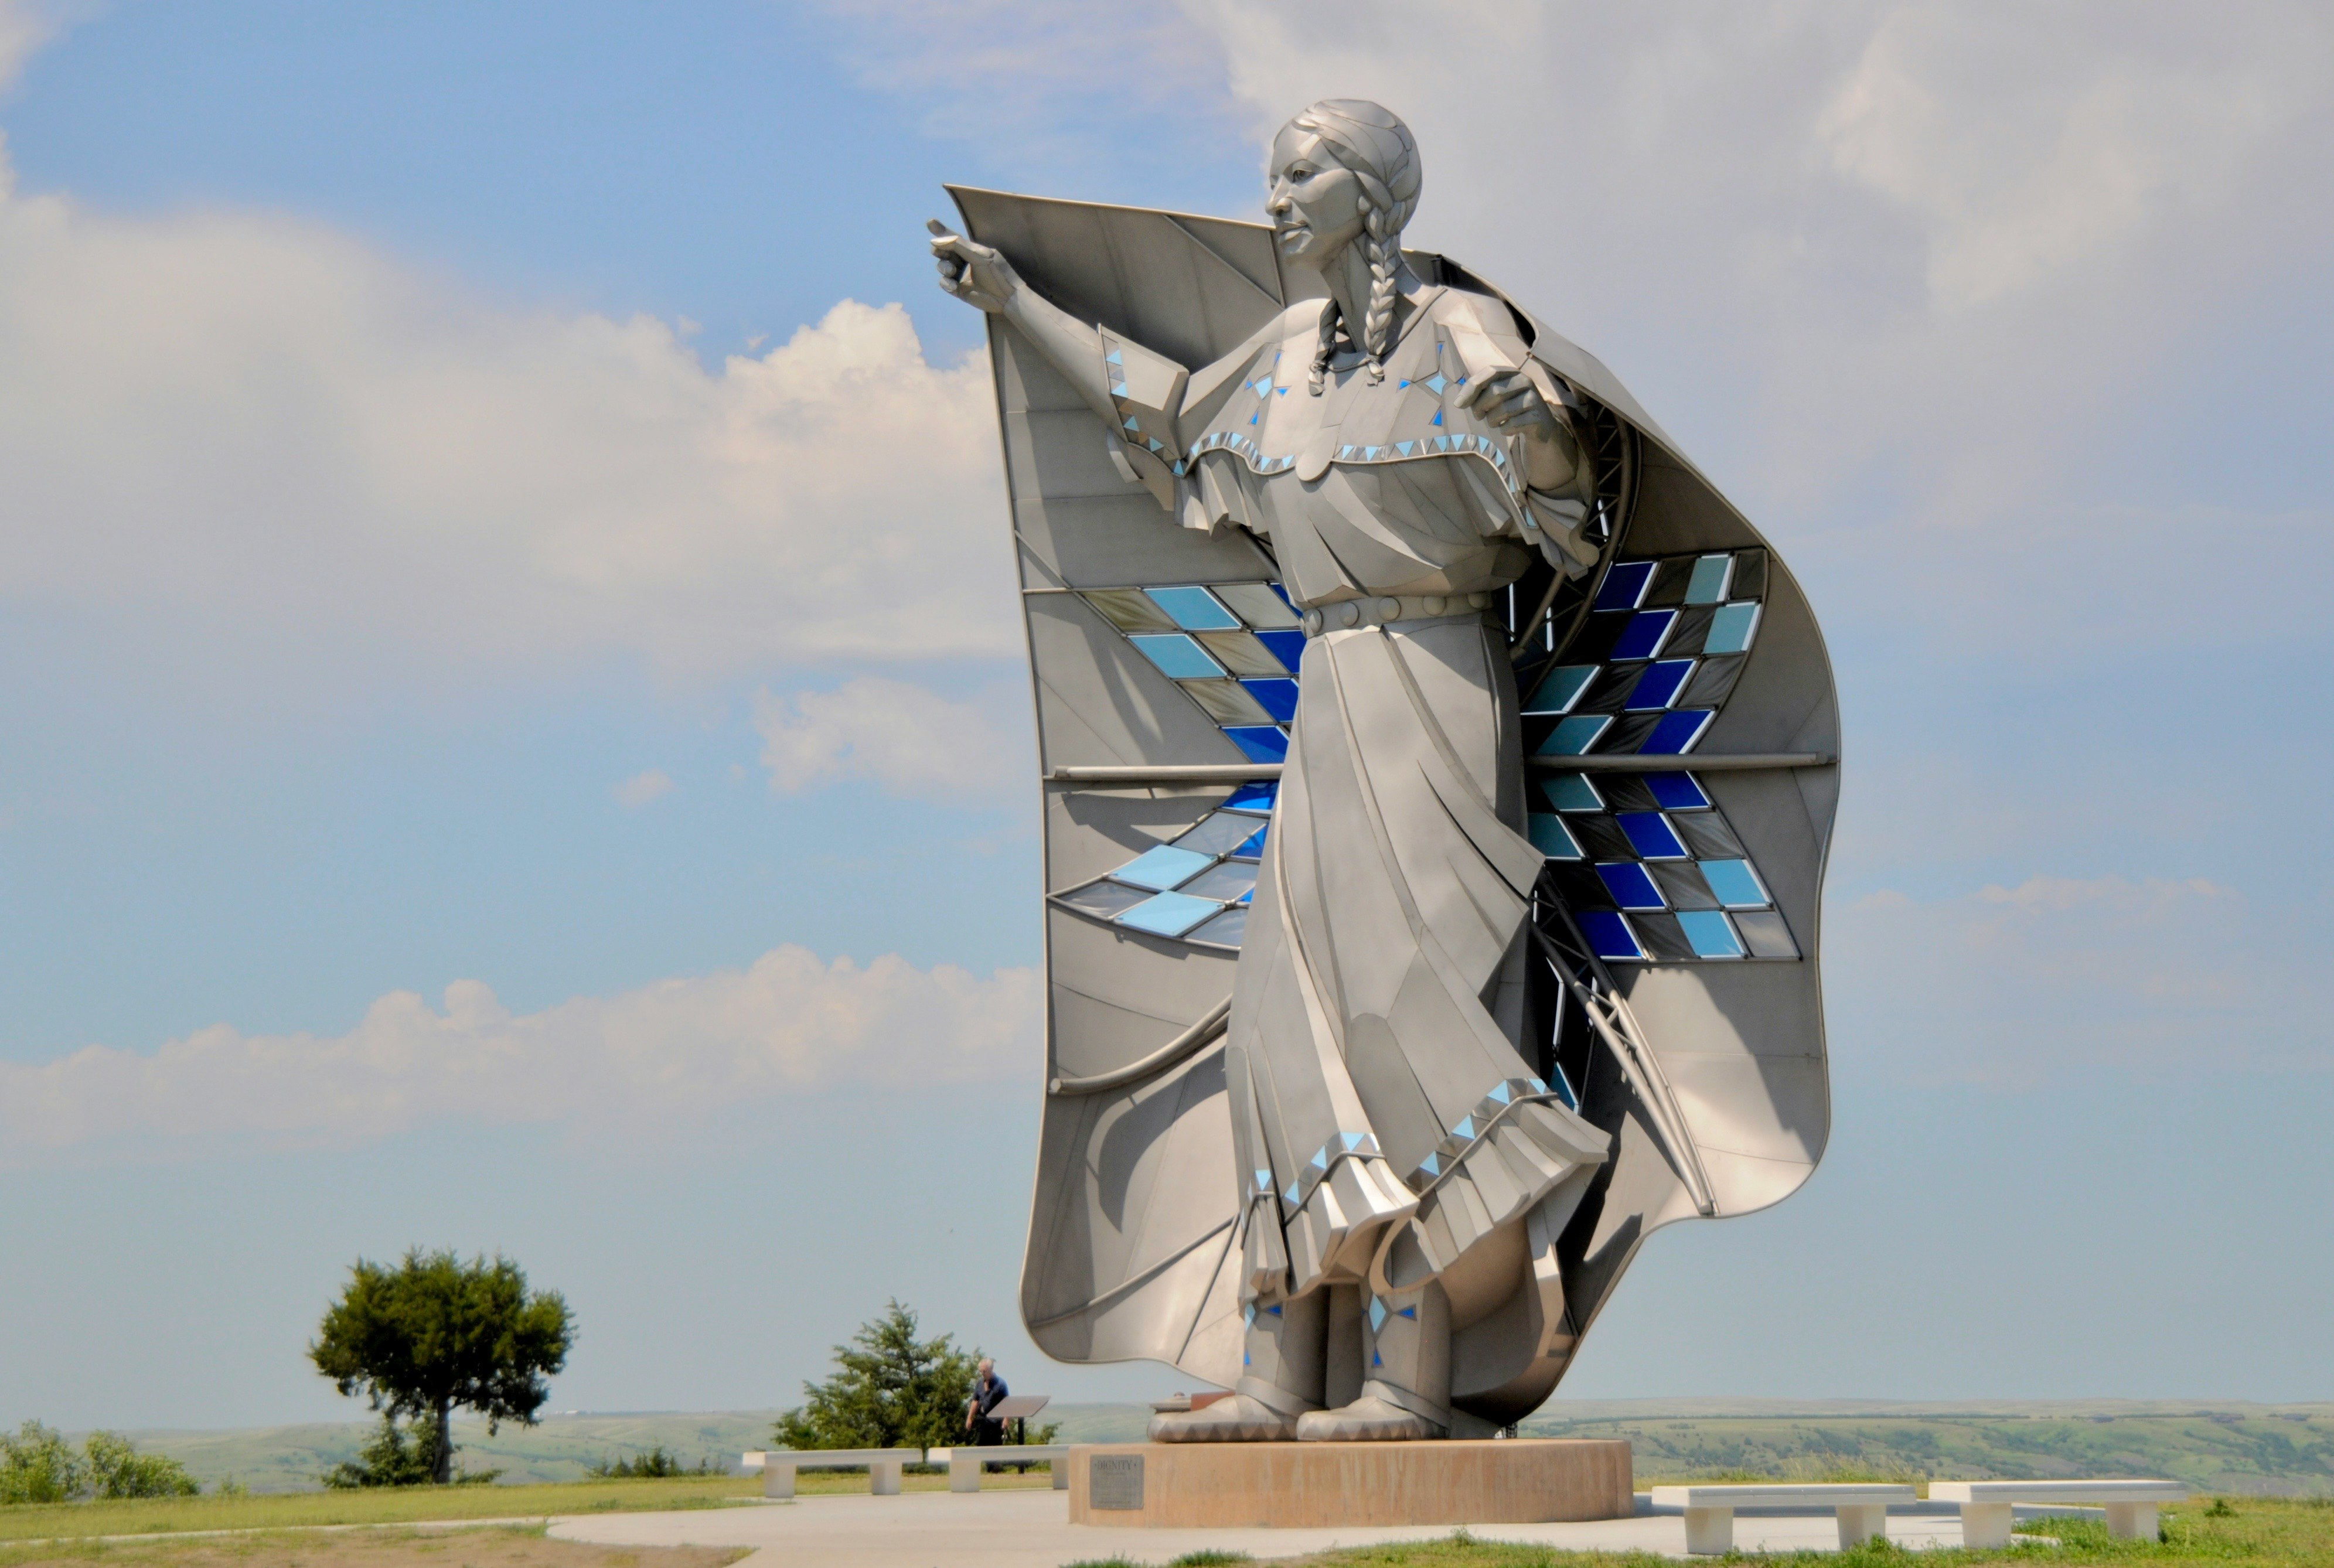 DIGNITY statue Native American Indian Sioux woman star quilt sculpture Dale Lamphere South Dakota Missouri River overlook